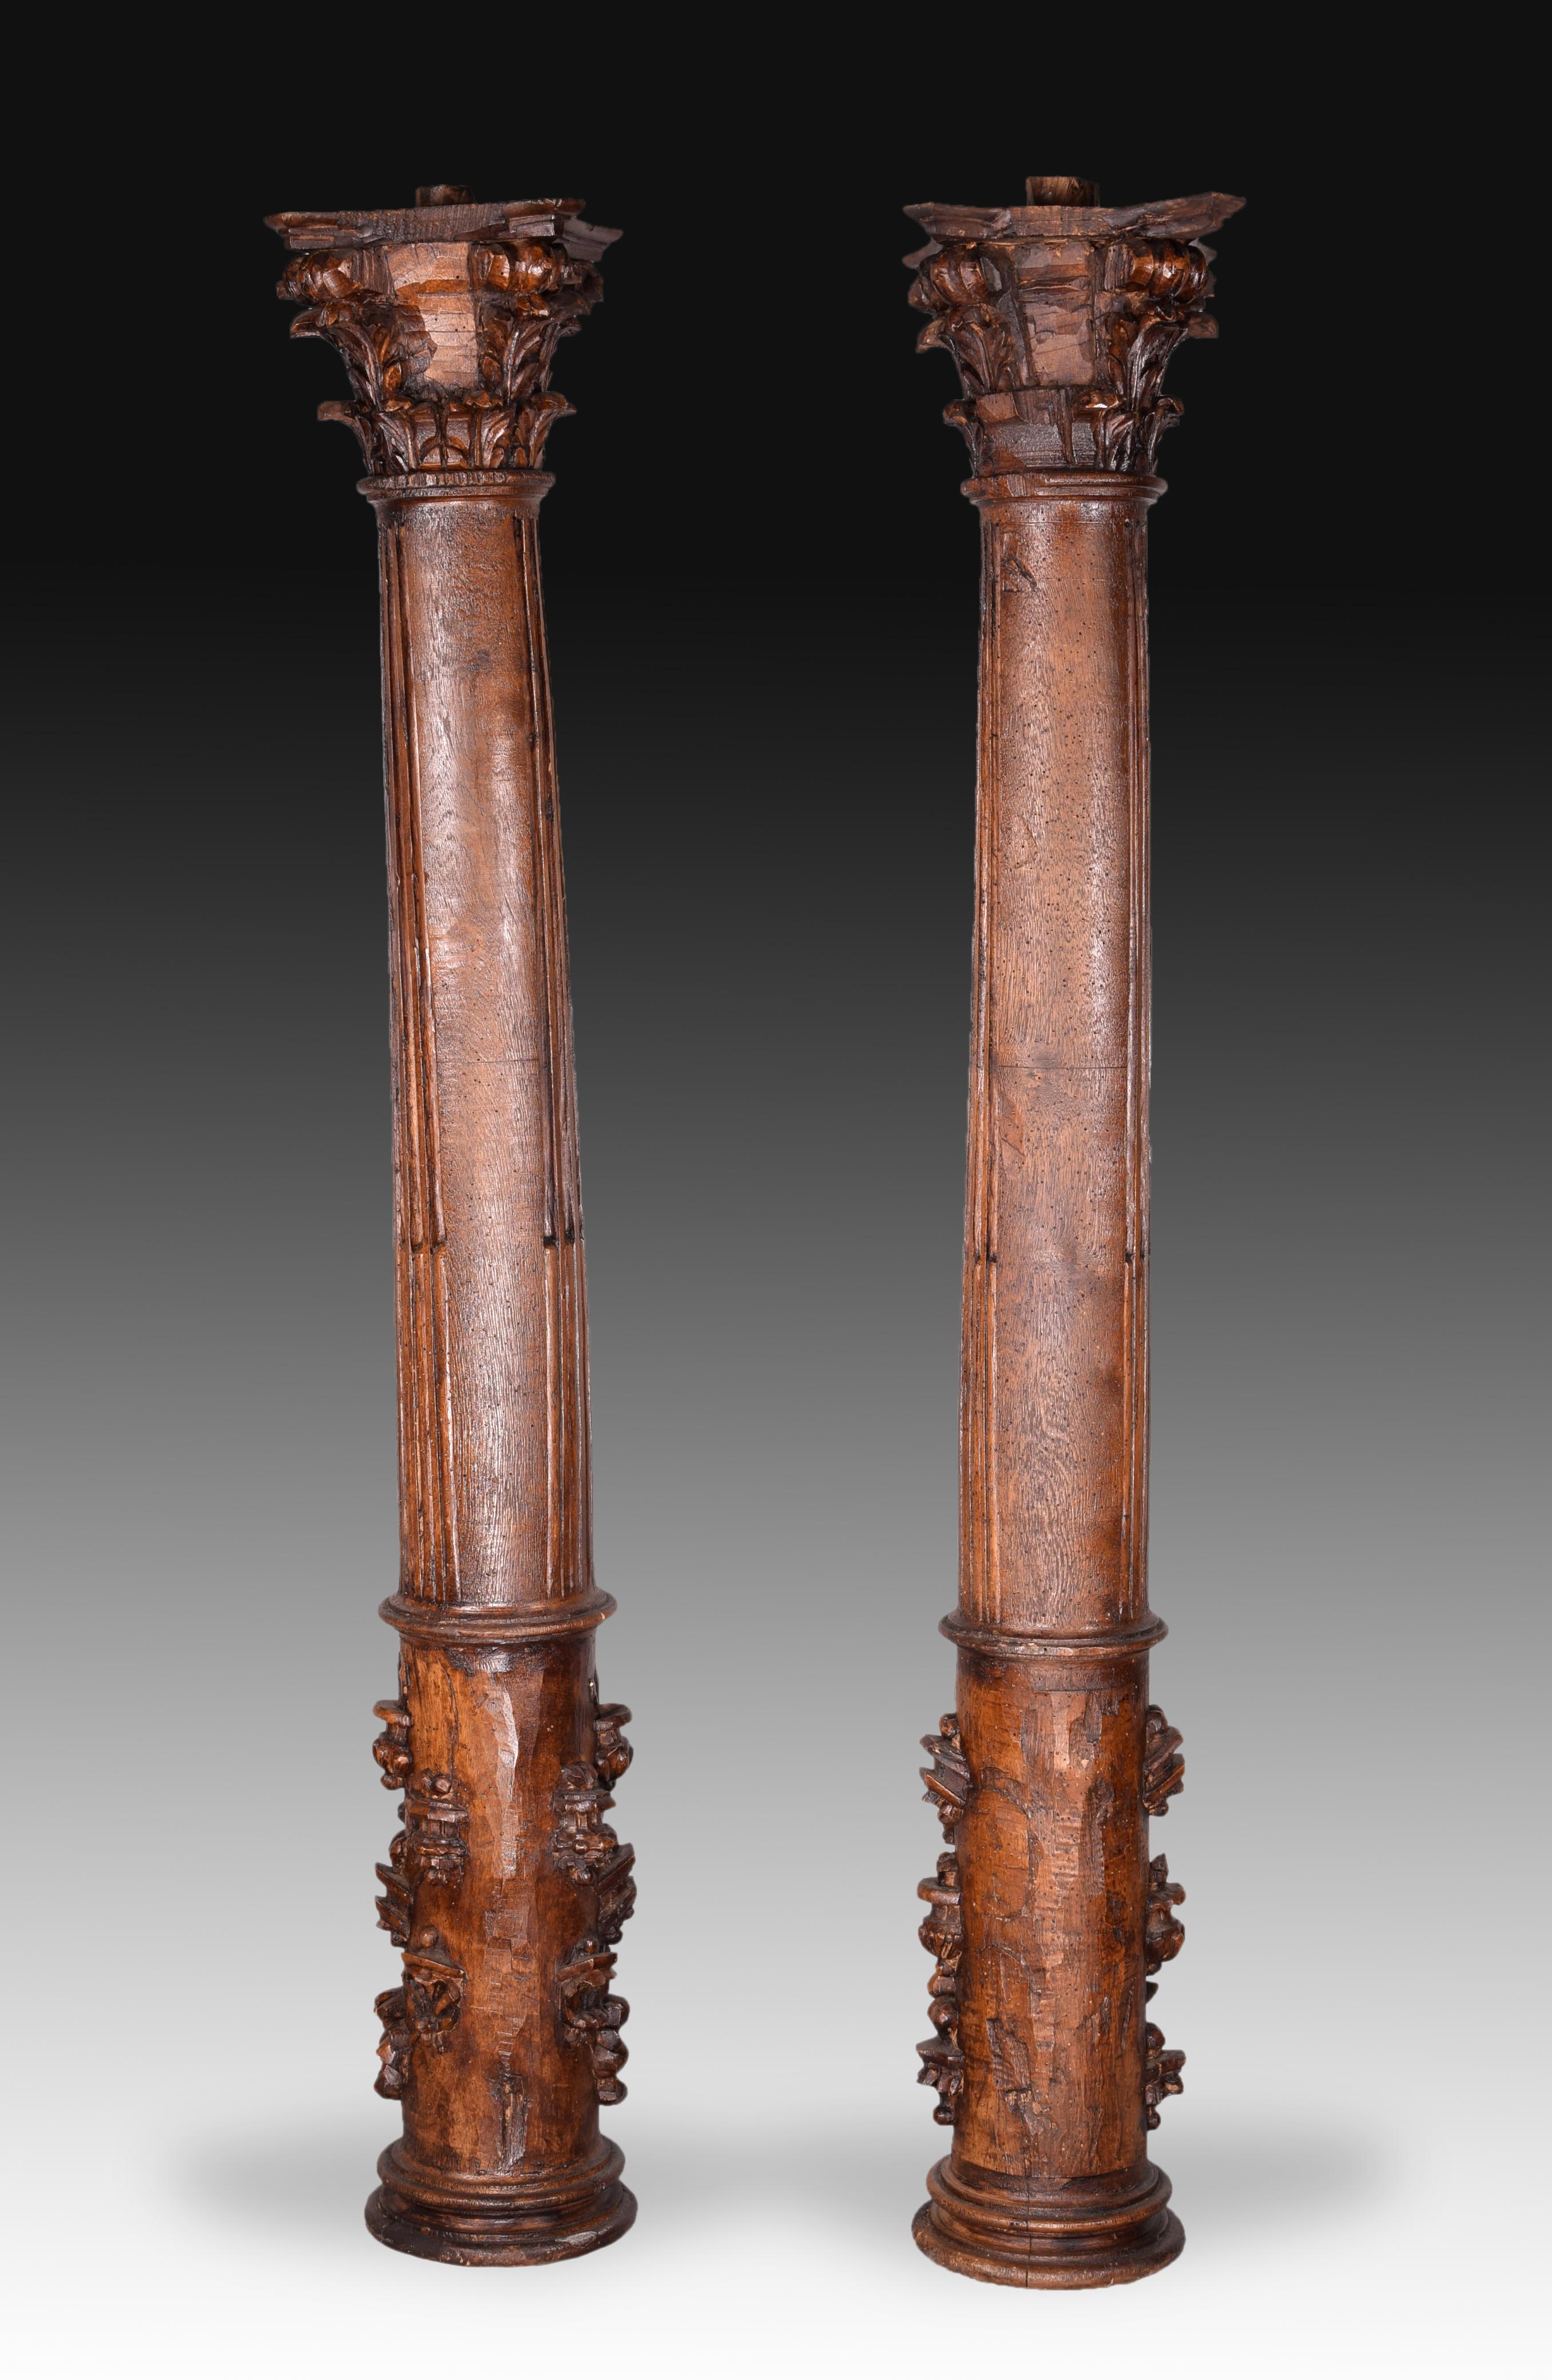 Hand-Carved Pair of Columns in Carved Wood, 17th Century For Sale